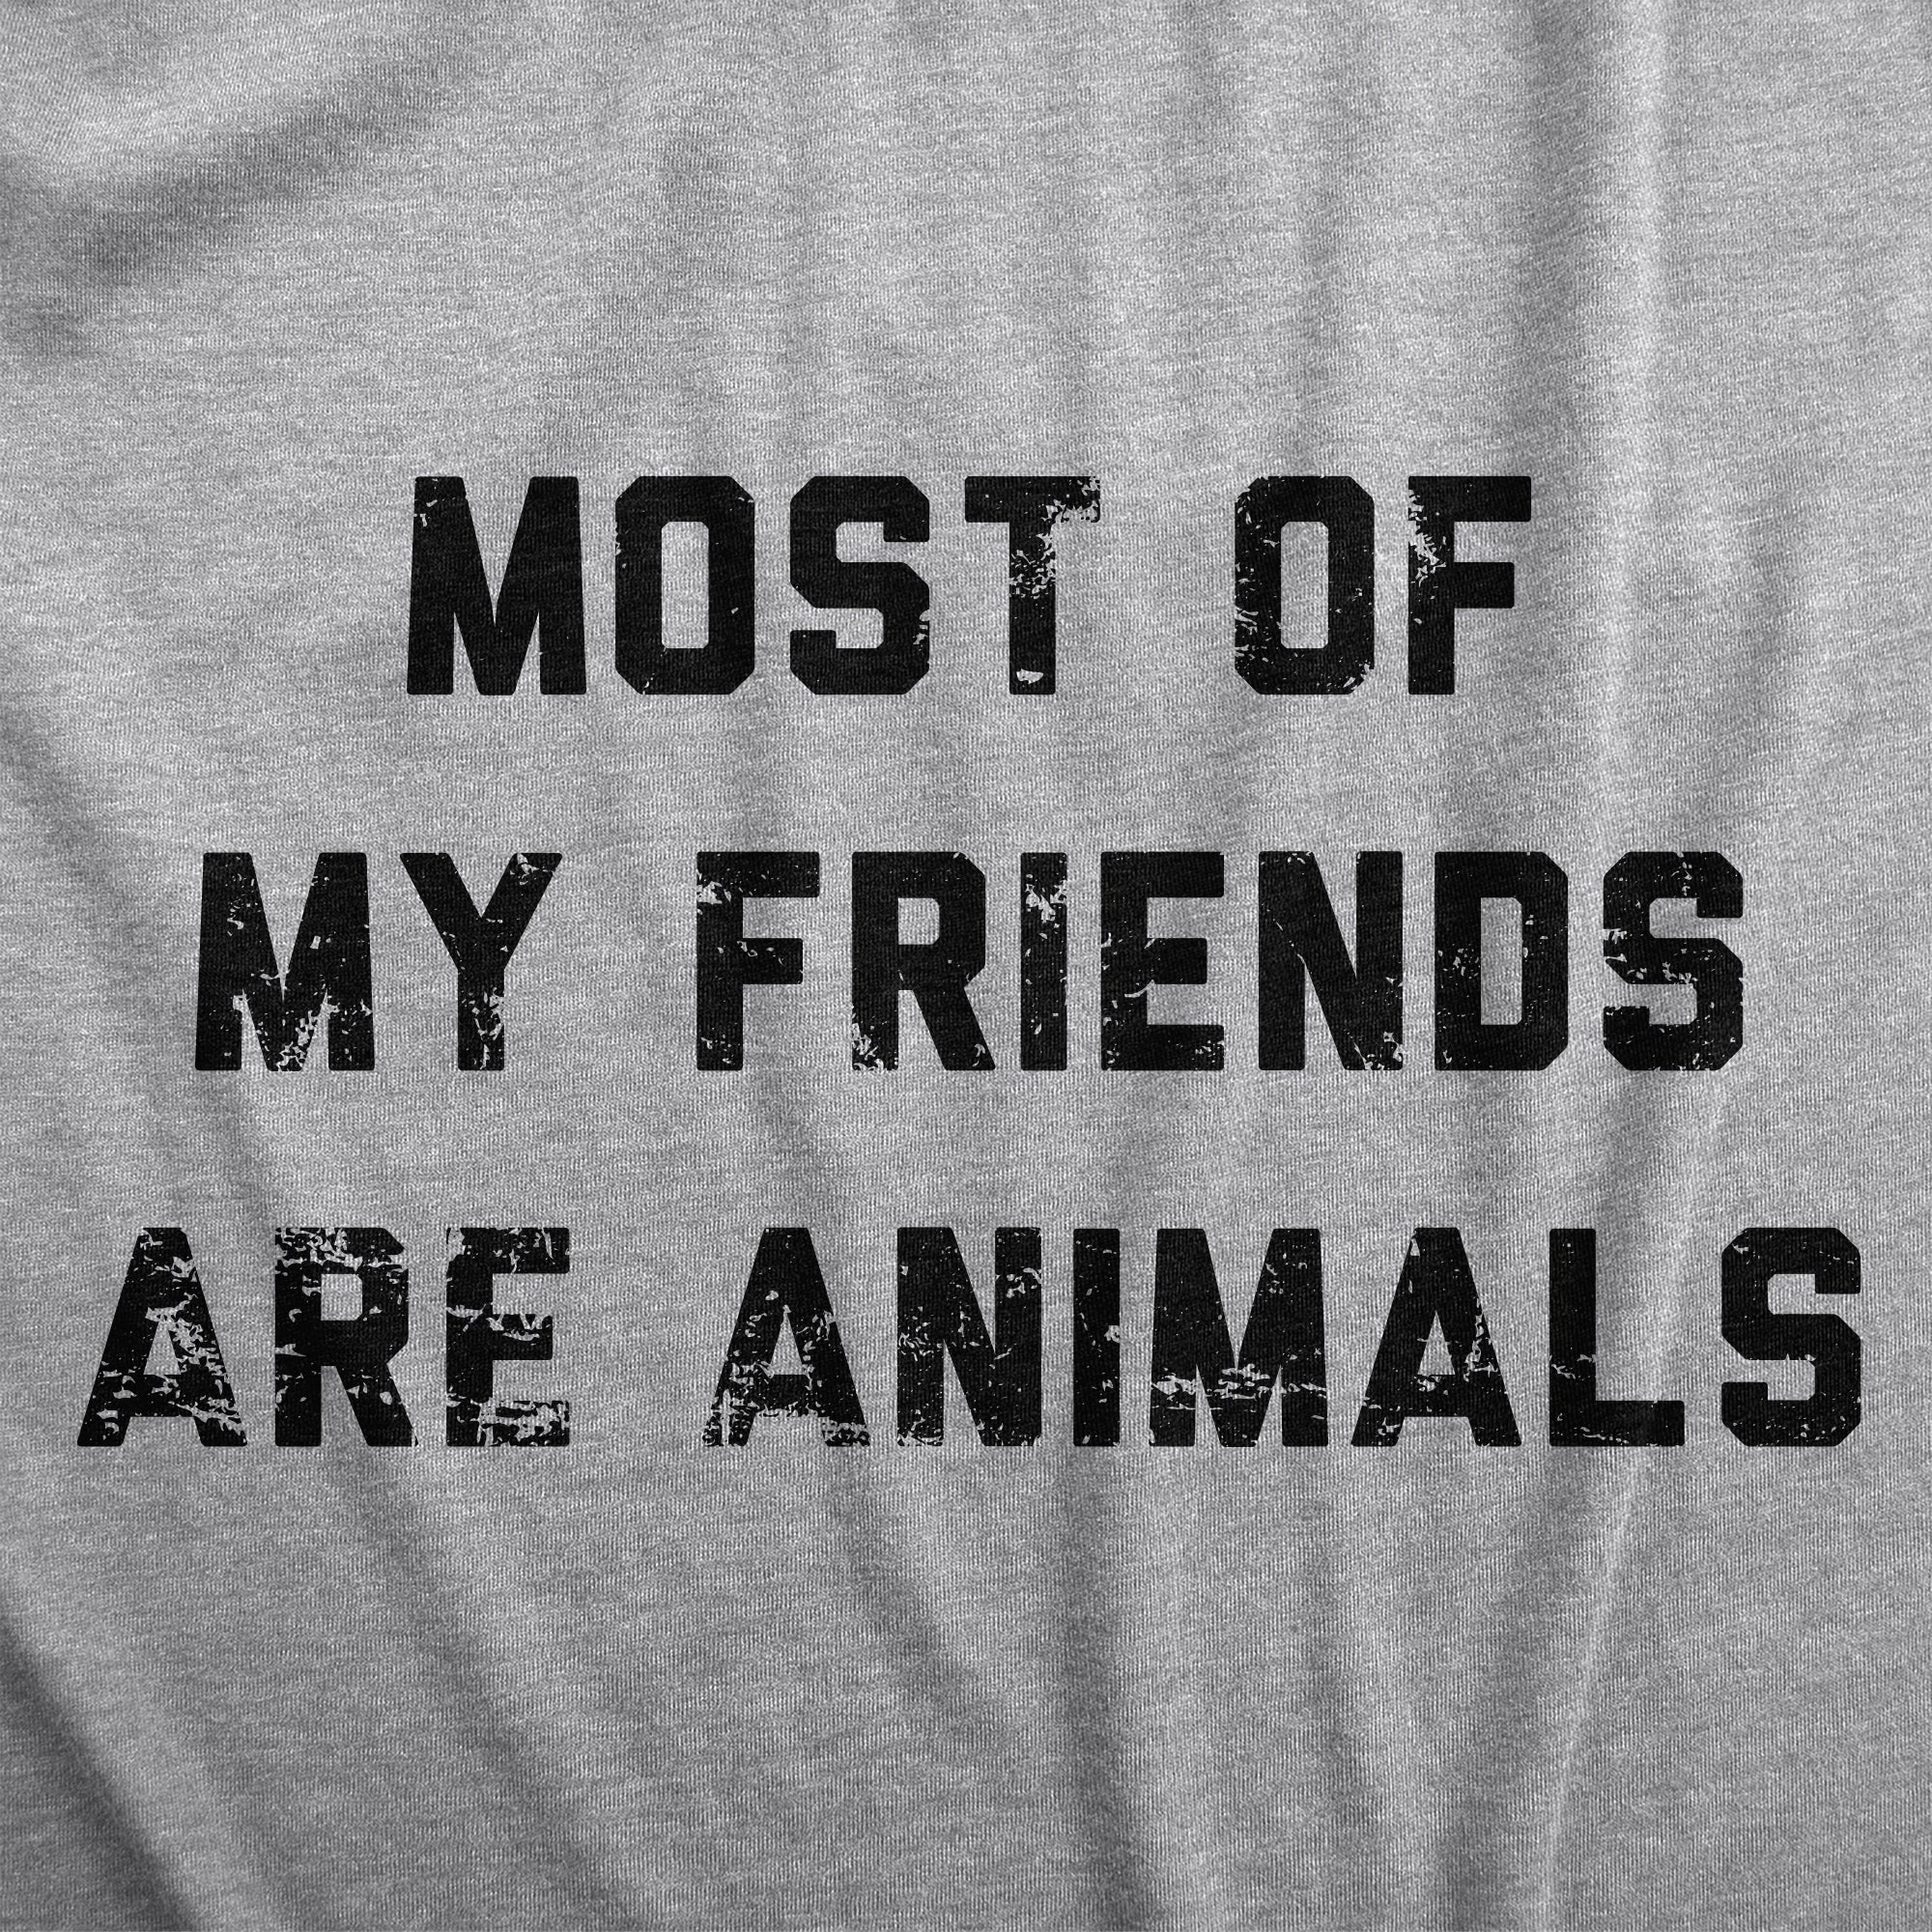 Funny Light Heather Grey - ANIMALS Most Of My Friends Are Animals Mens T Shirt Nerdy Animal introvert Tee